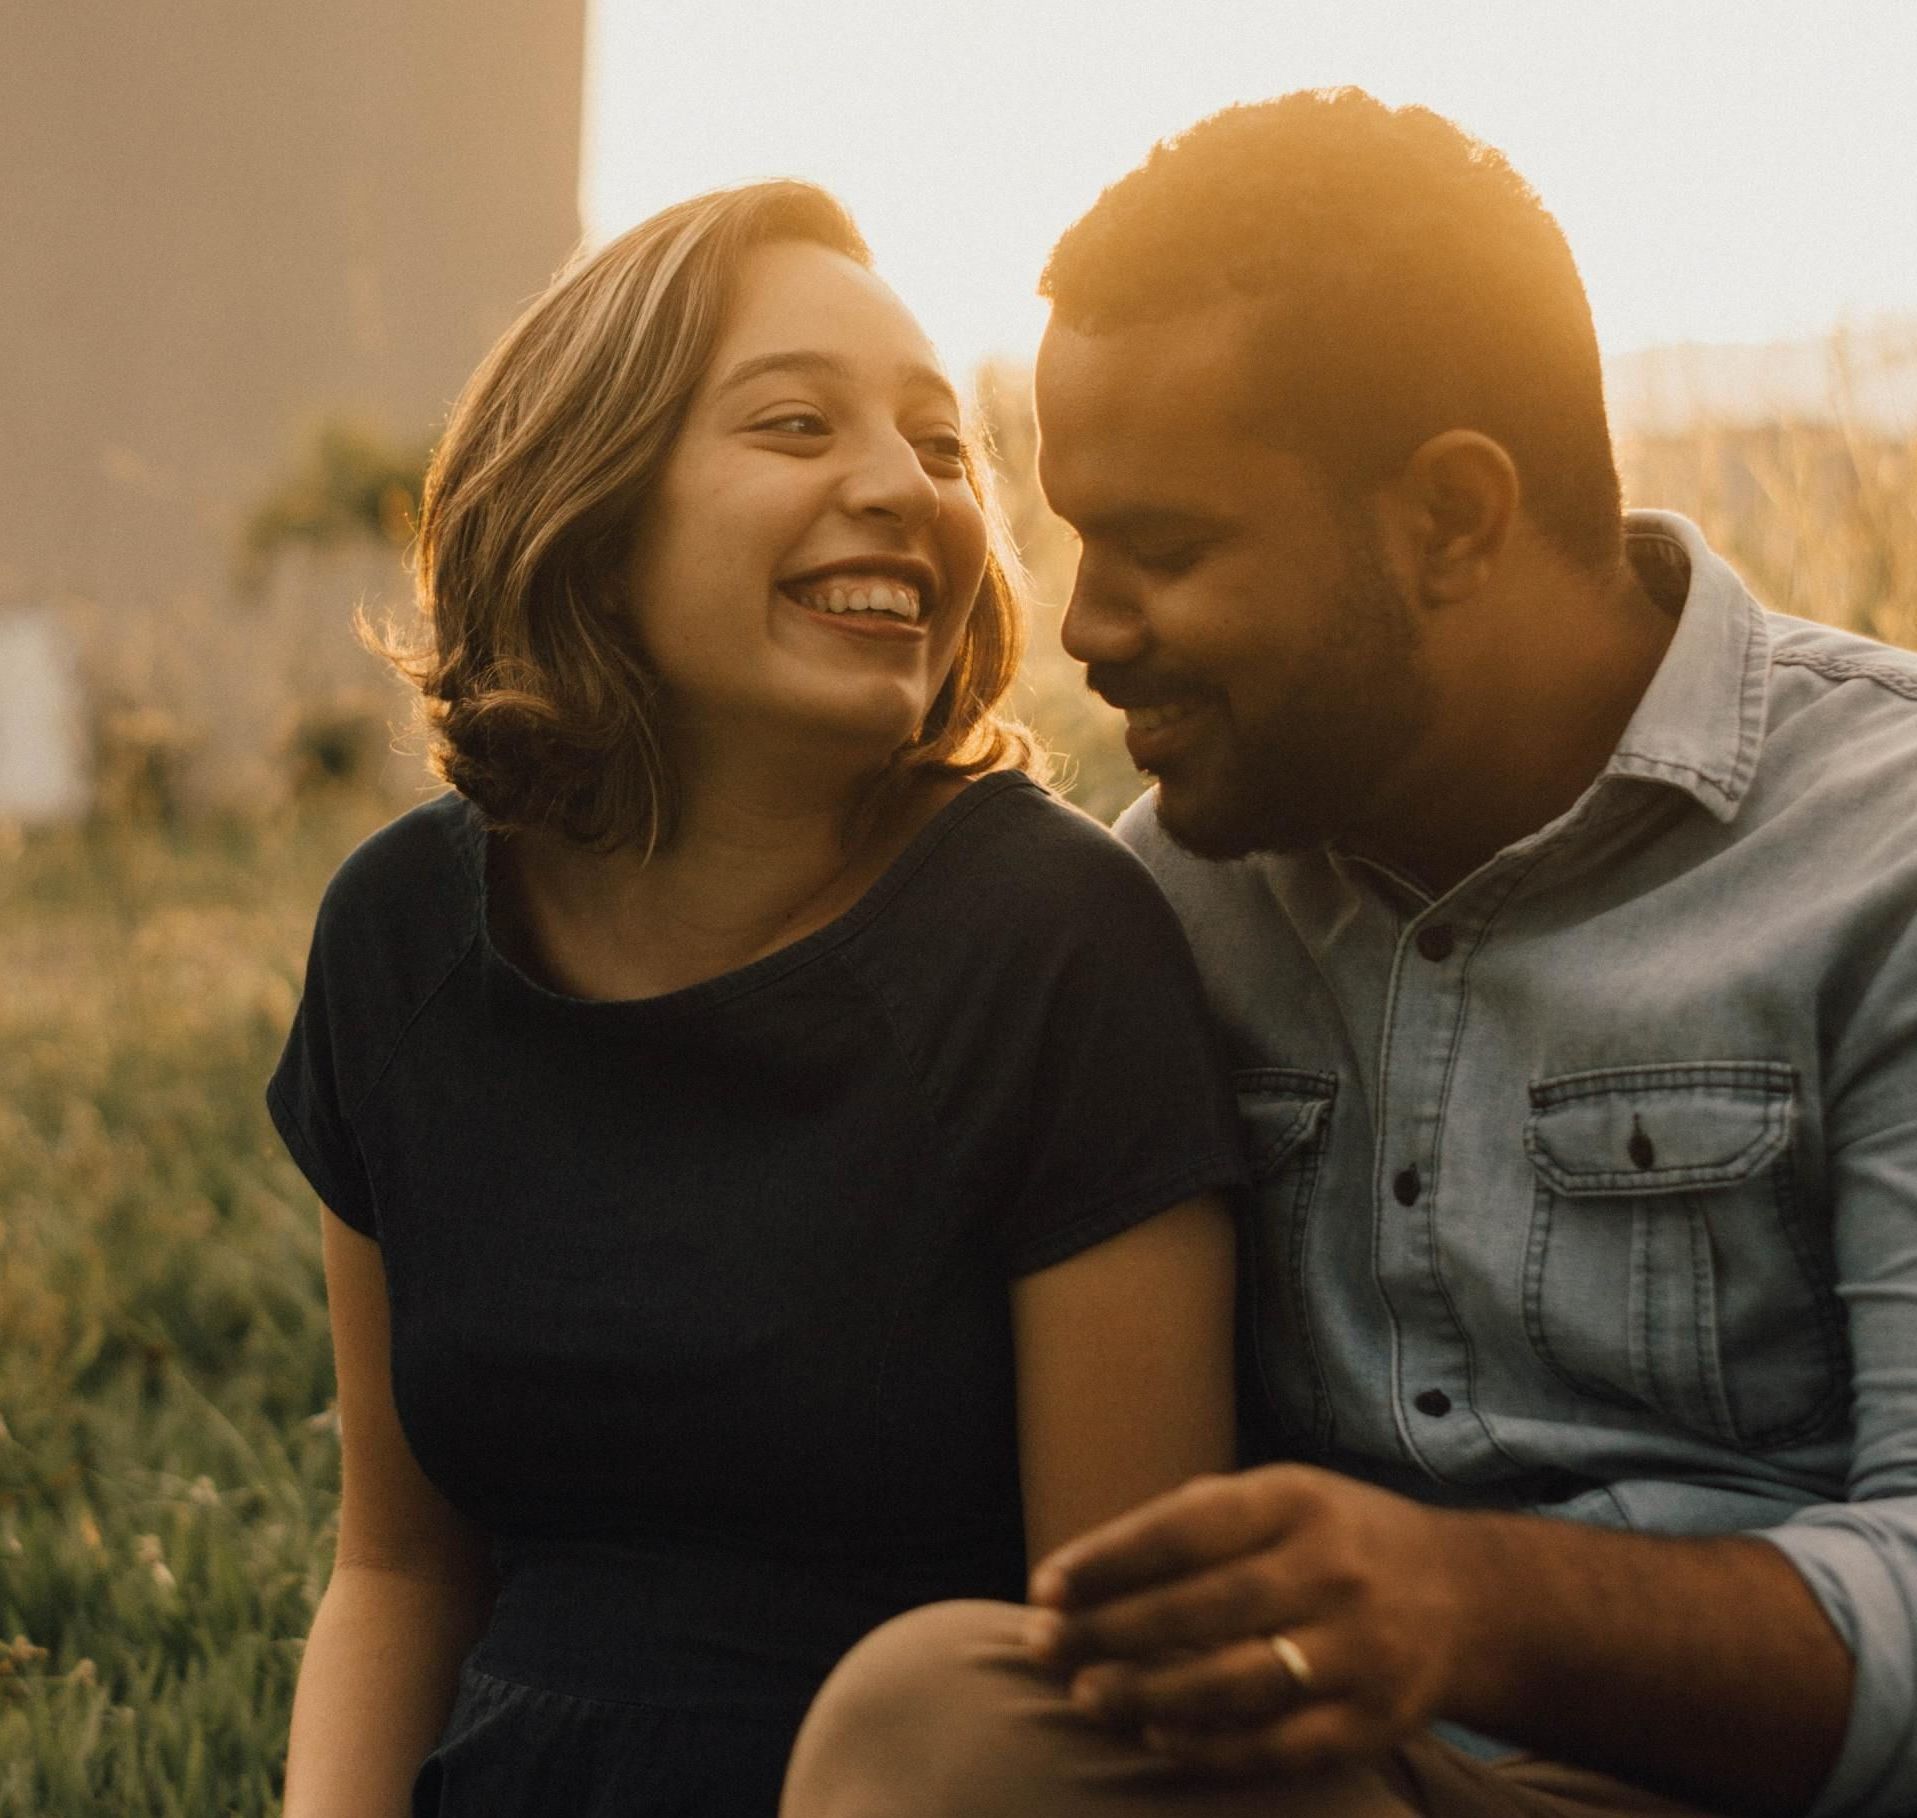 Regardless of the stage in your relationship, feeling disconnected from your partner can leave you feeling lost and lonely. From the blissfully romantic to those on the edge of divorce, couples retreats can help reignite your passion, form deeper connections, and improve your relationship.